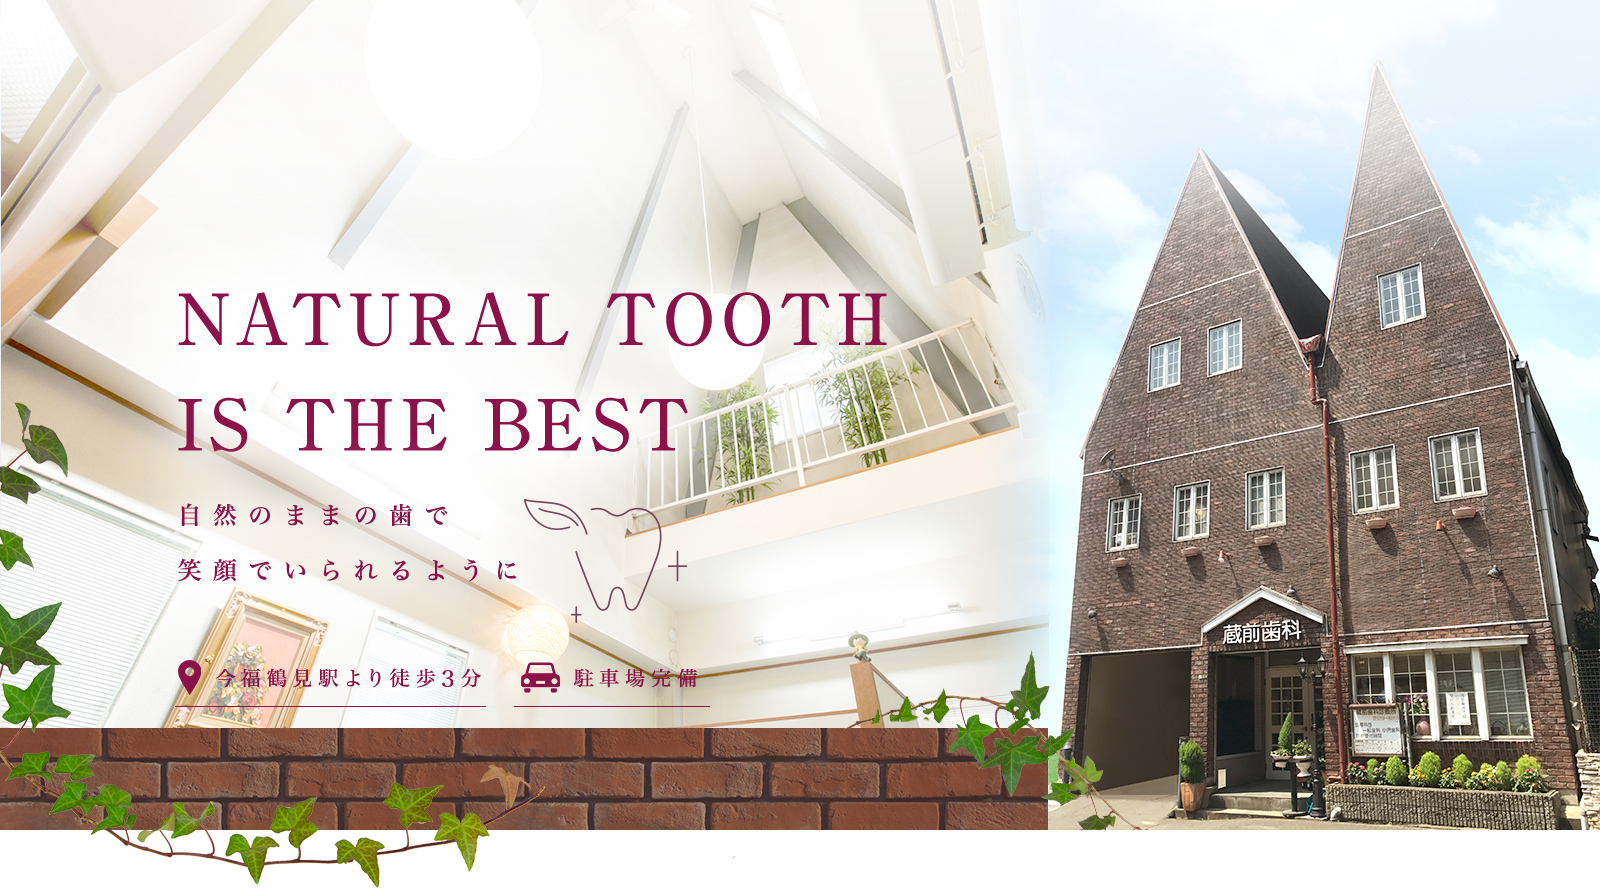 NATURAL TOOTH
IS THE BEST 自然のままの歯で笑顔でいられるように 20:00まで診療 今福鶴見駅より徒歩3分 駐車場完備